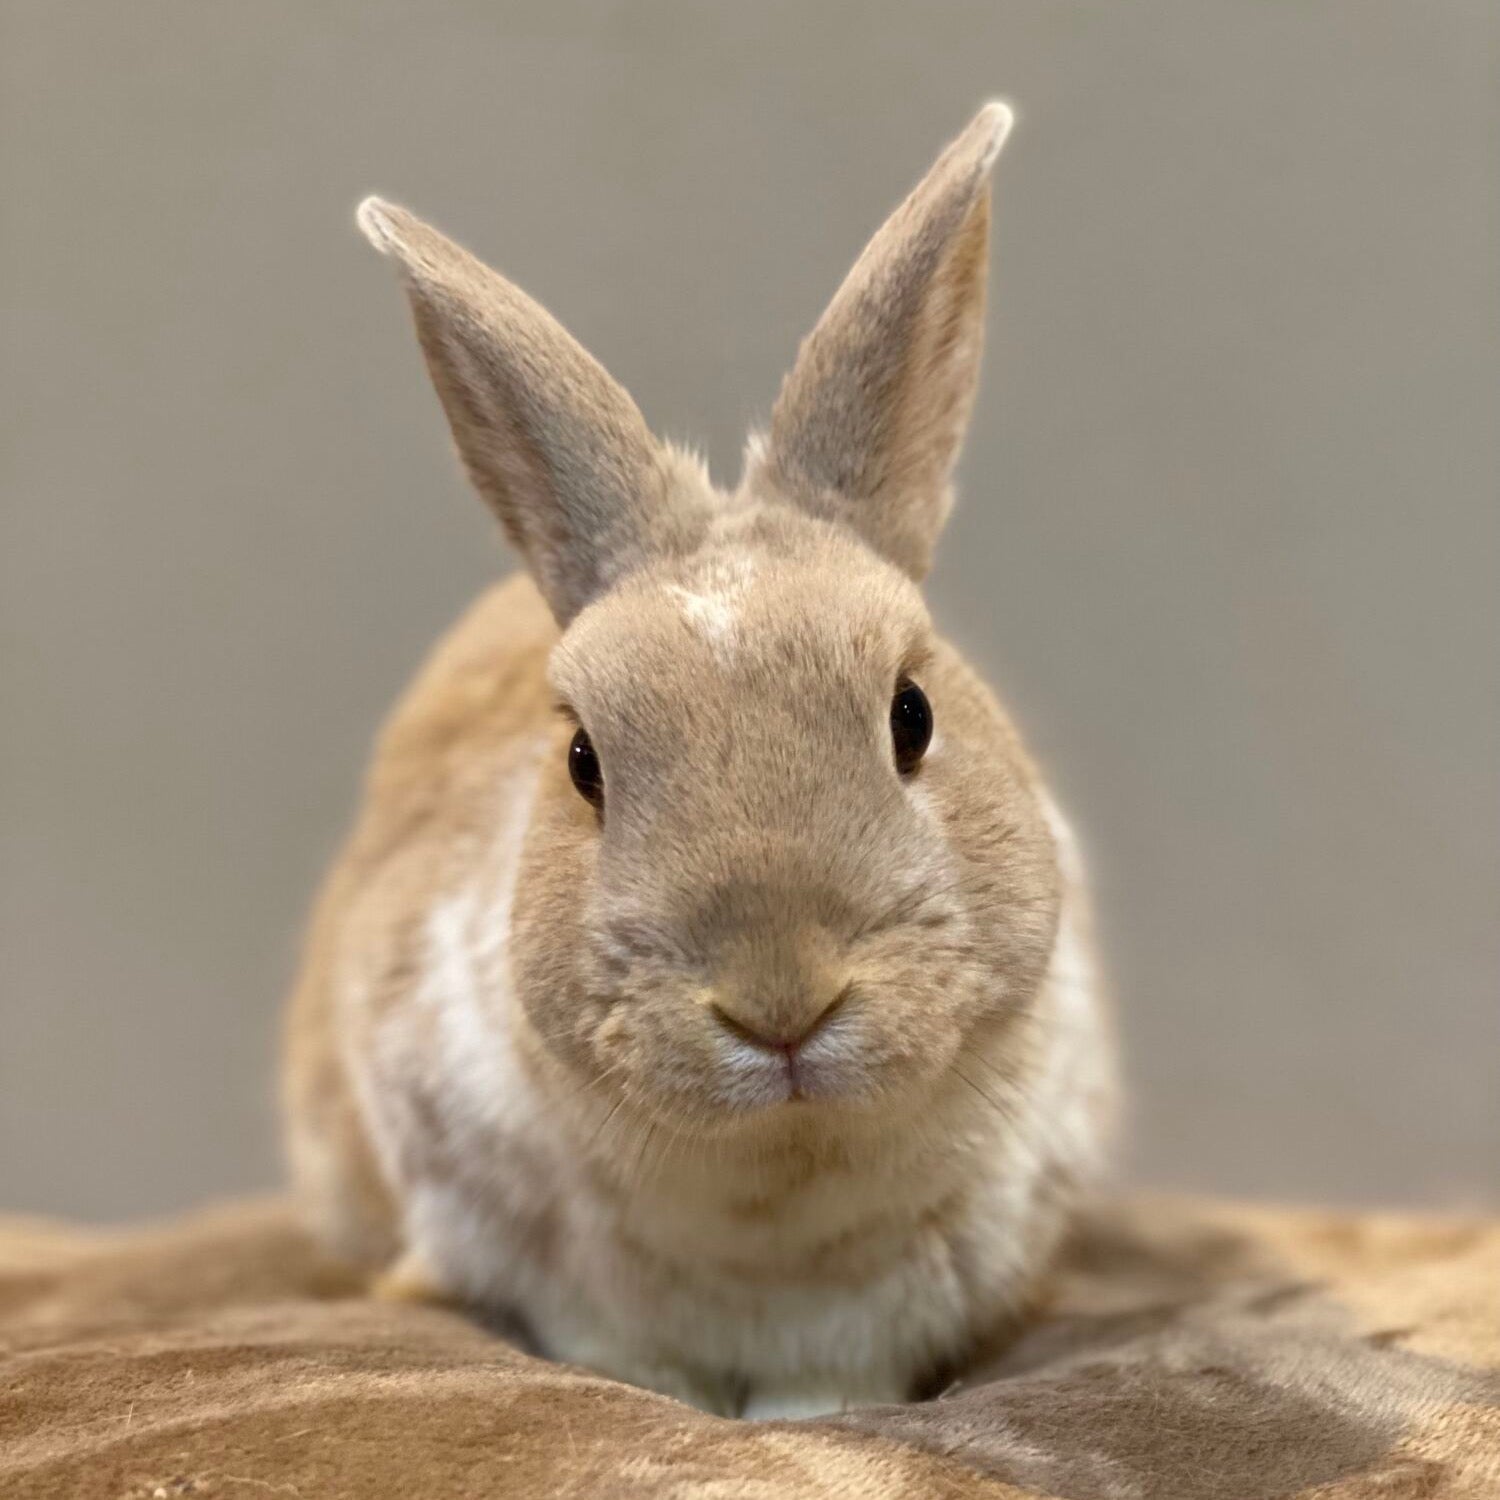 Button, a small brown and white mixed breed rabbit, staring directly at the camera.